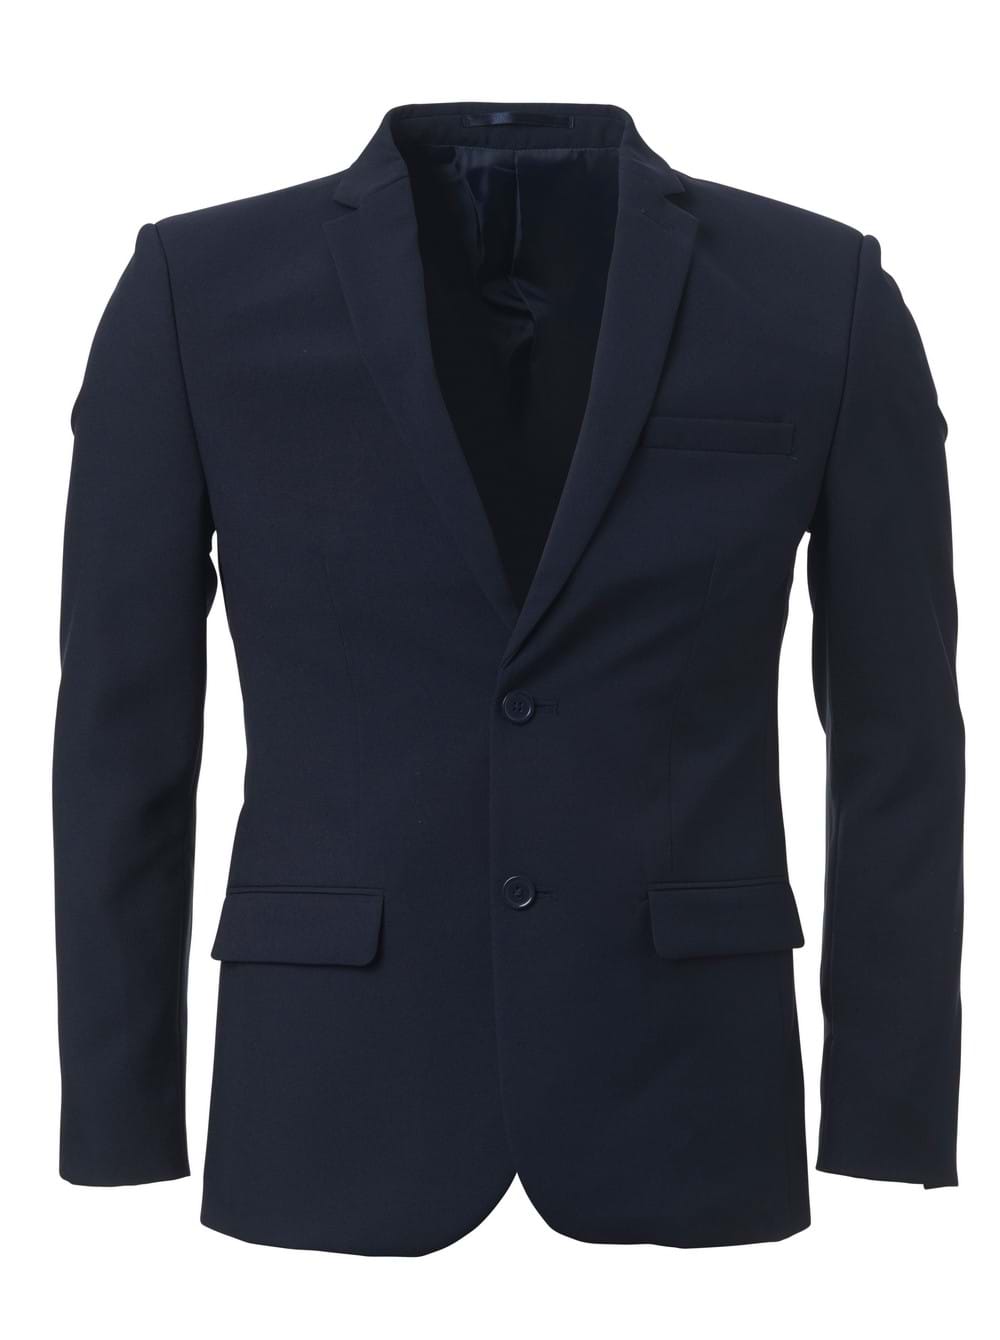 Men’s Marco Fashion Fit Jacket- Fabric 896 Navy / 50